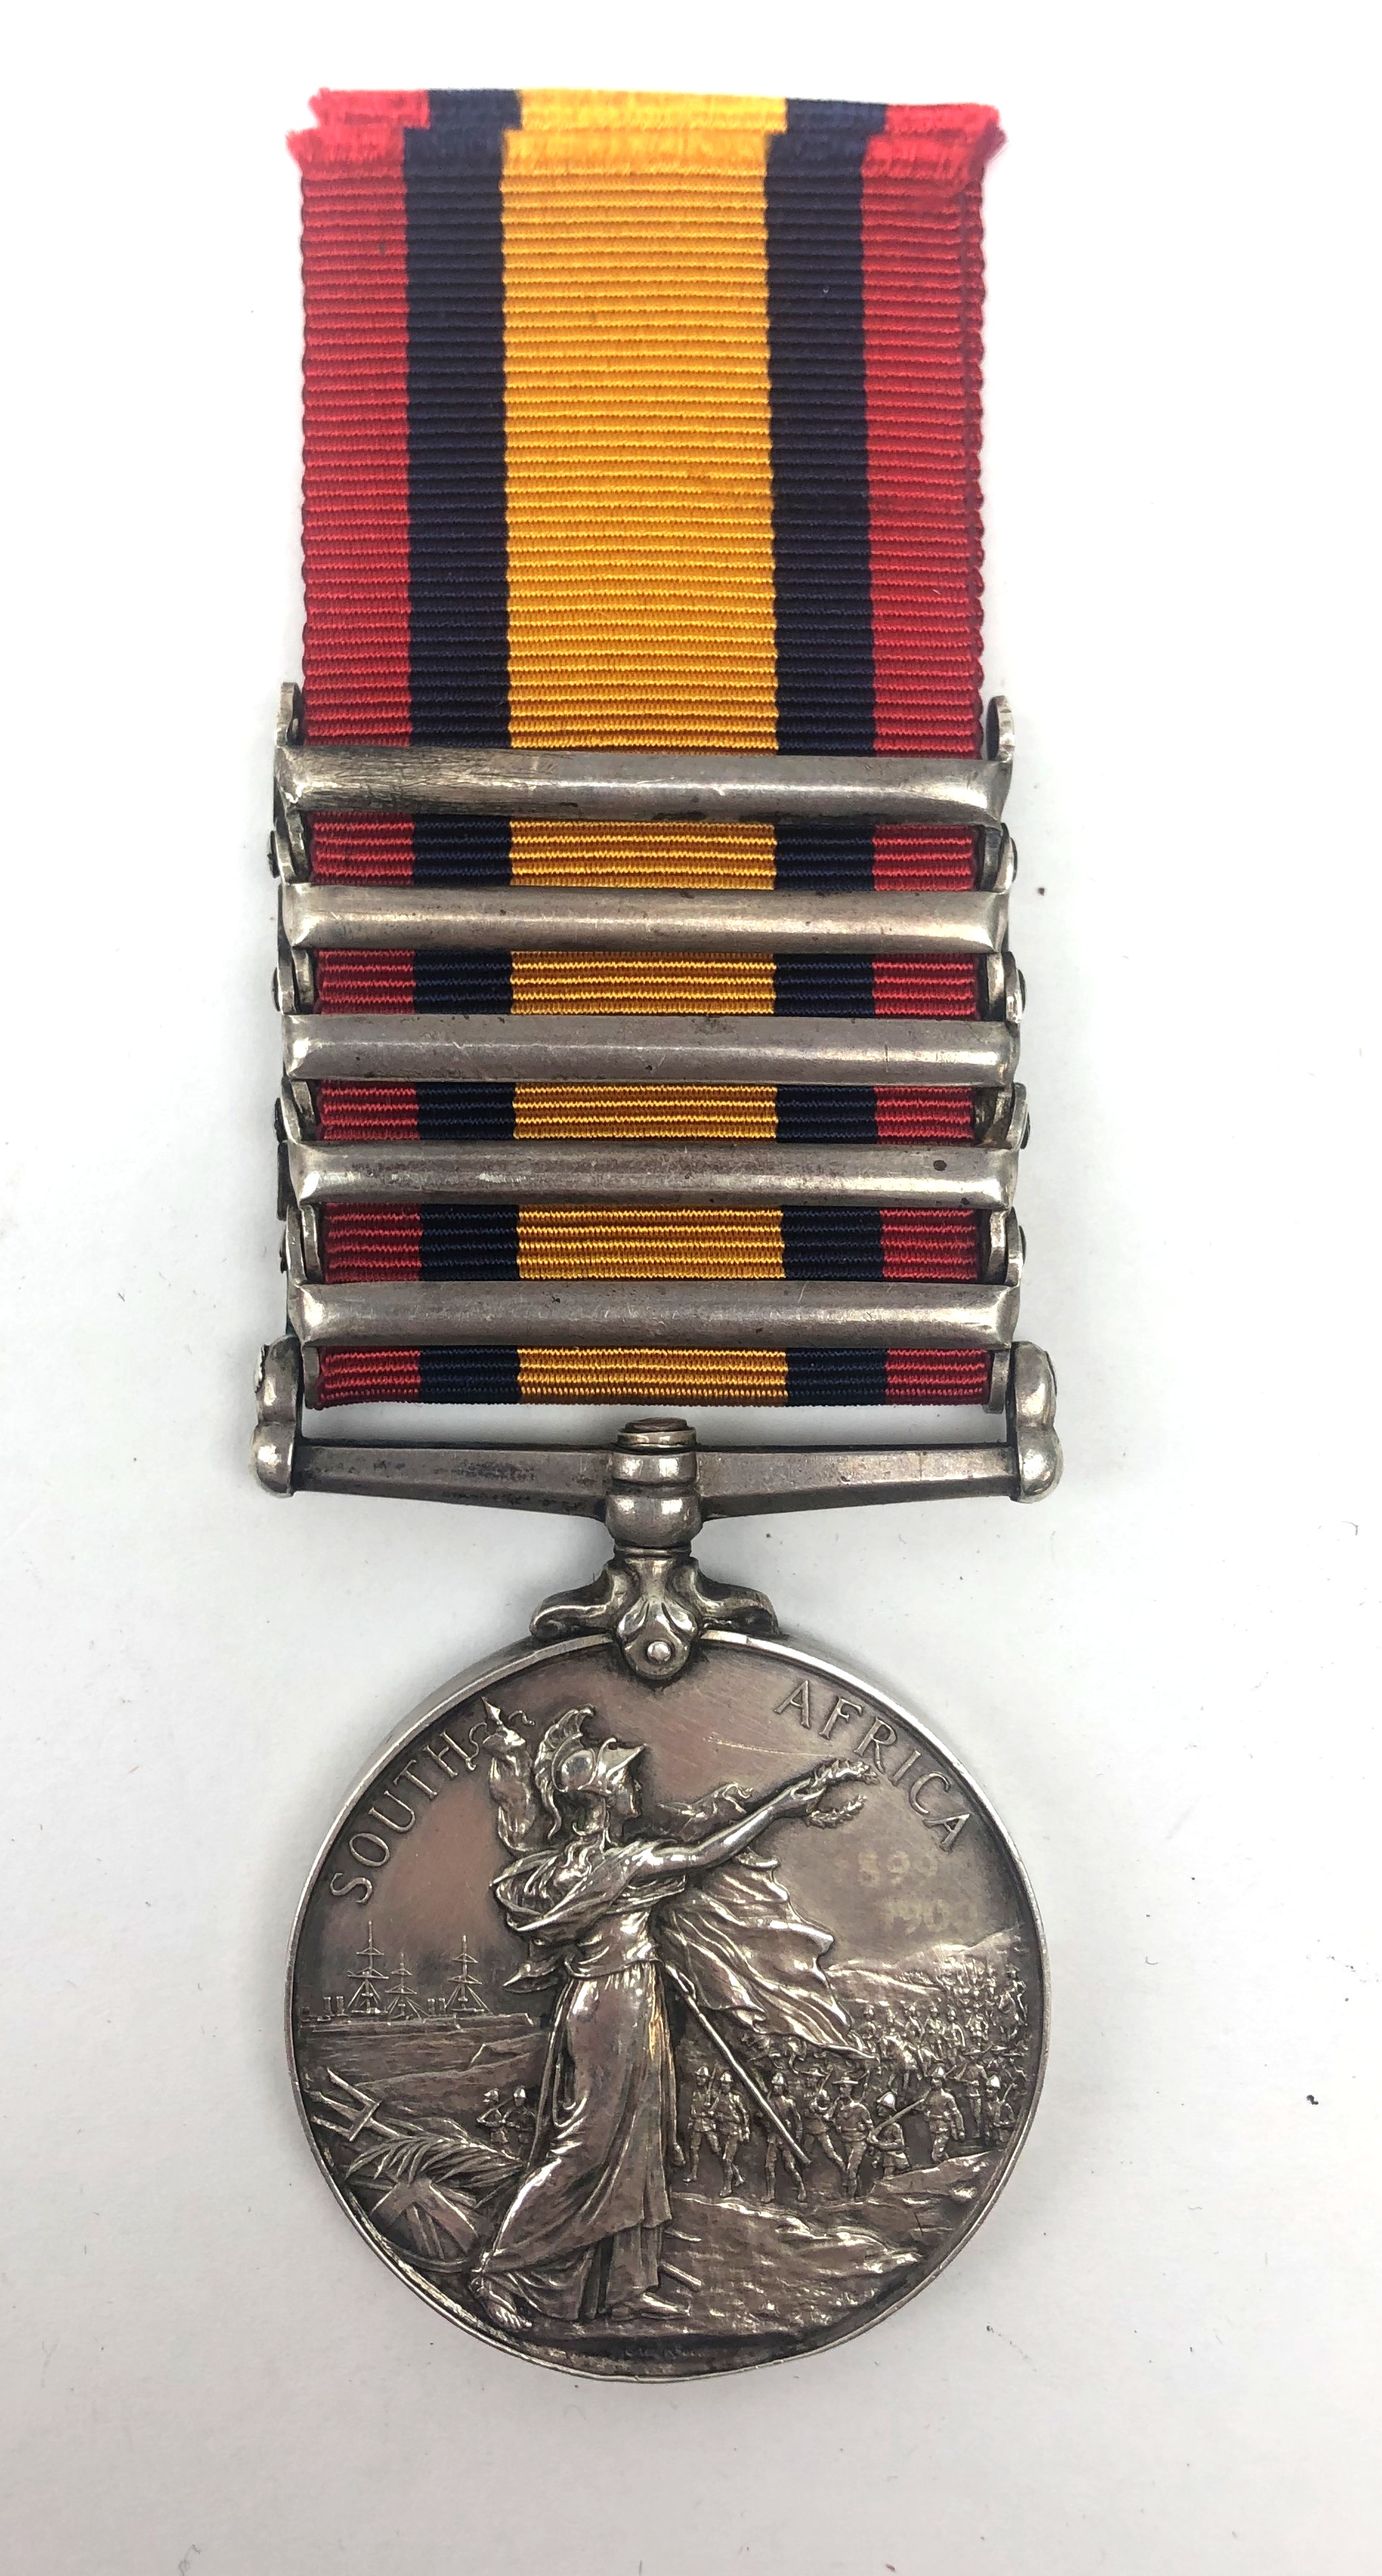 Queens South Africa medal, with clasps for Laing's Nek, Transvaal. - Image 2 of 2